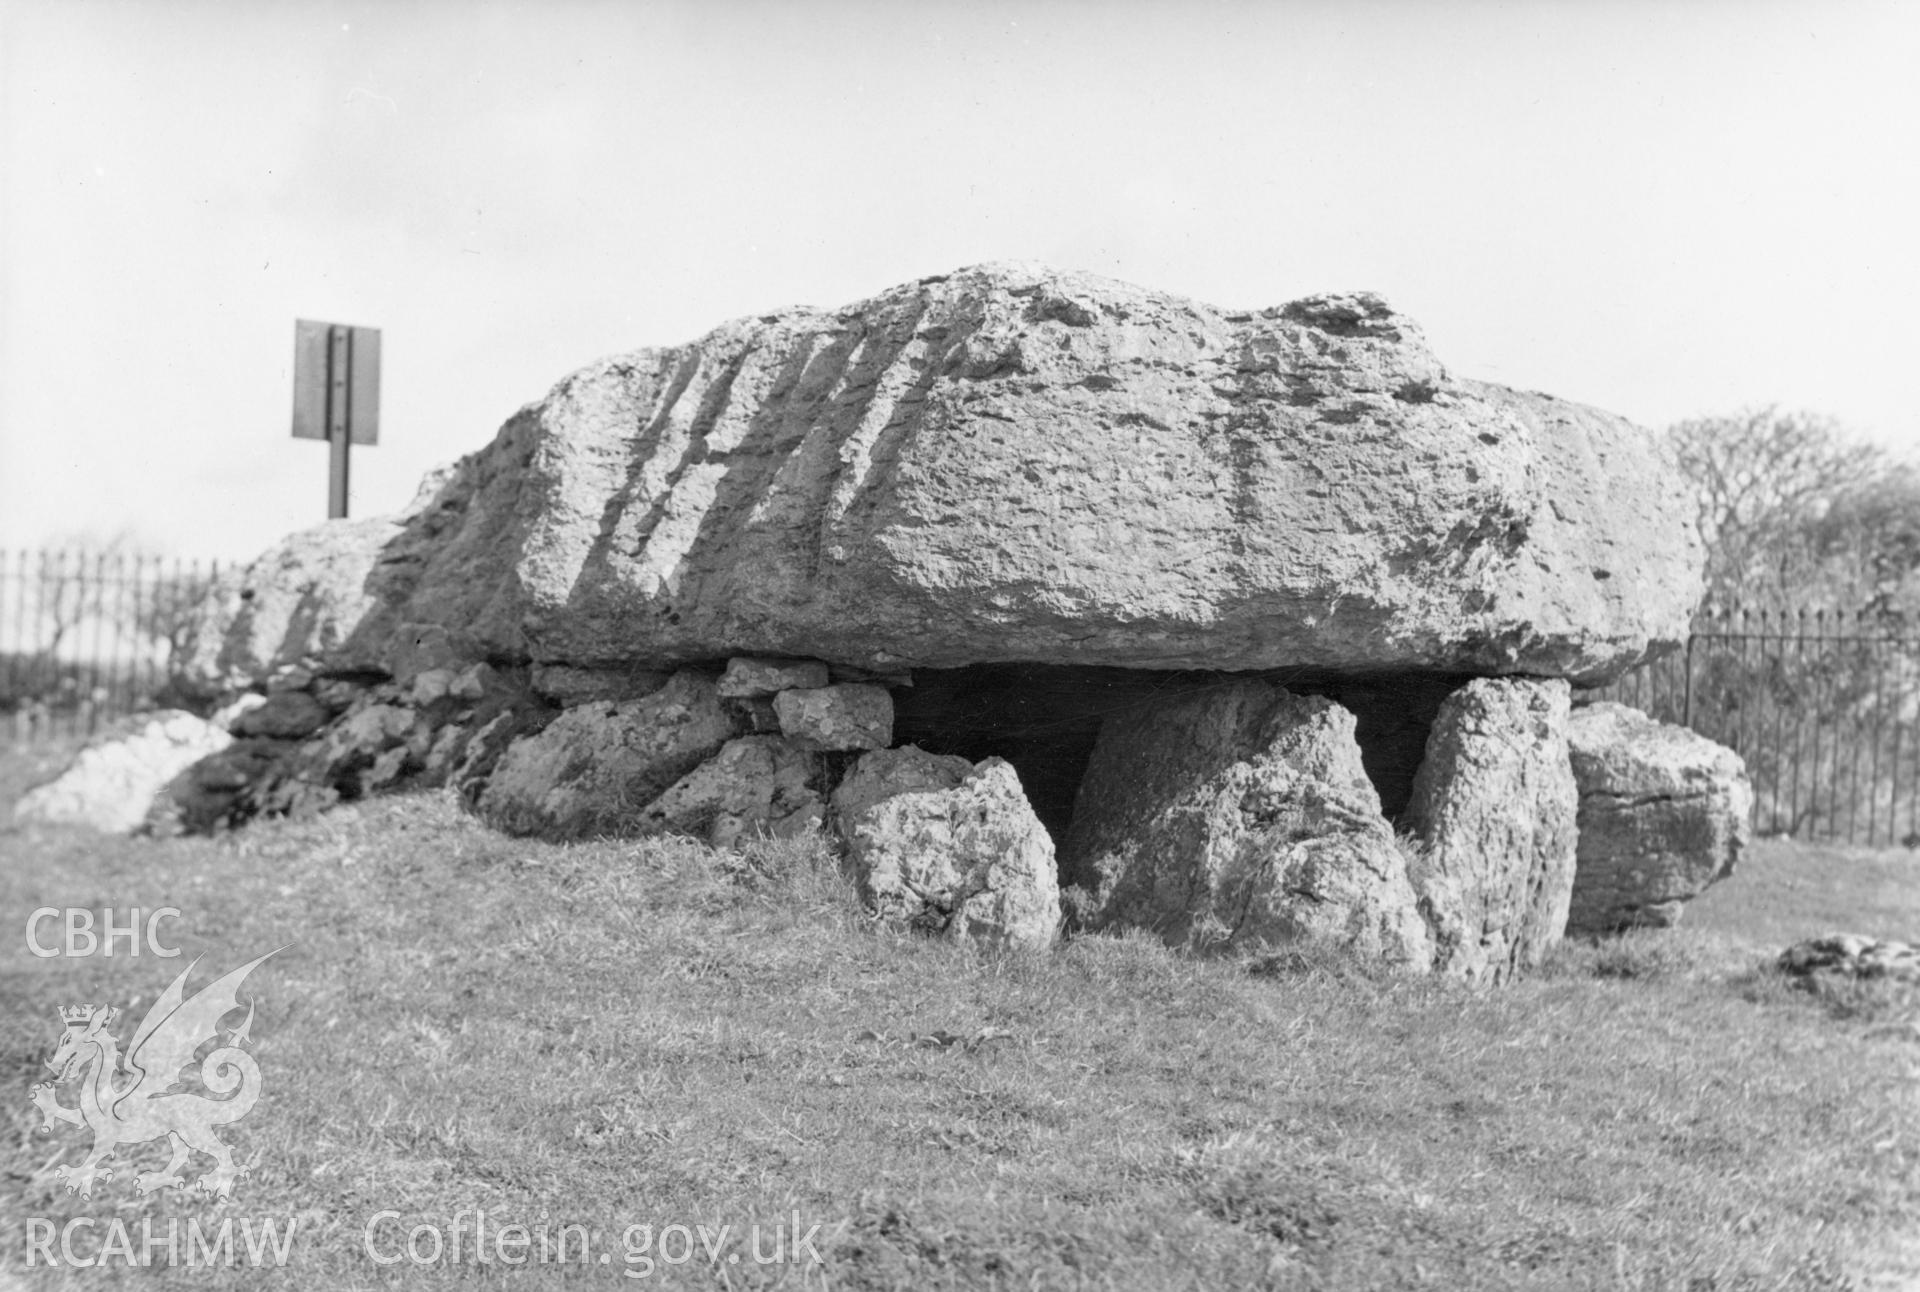 View of Lligwy Burial Chamber.  Dated 4th April 1951.